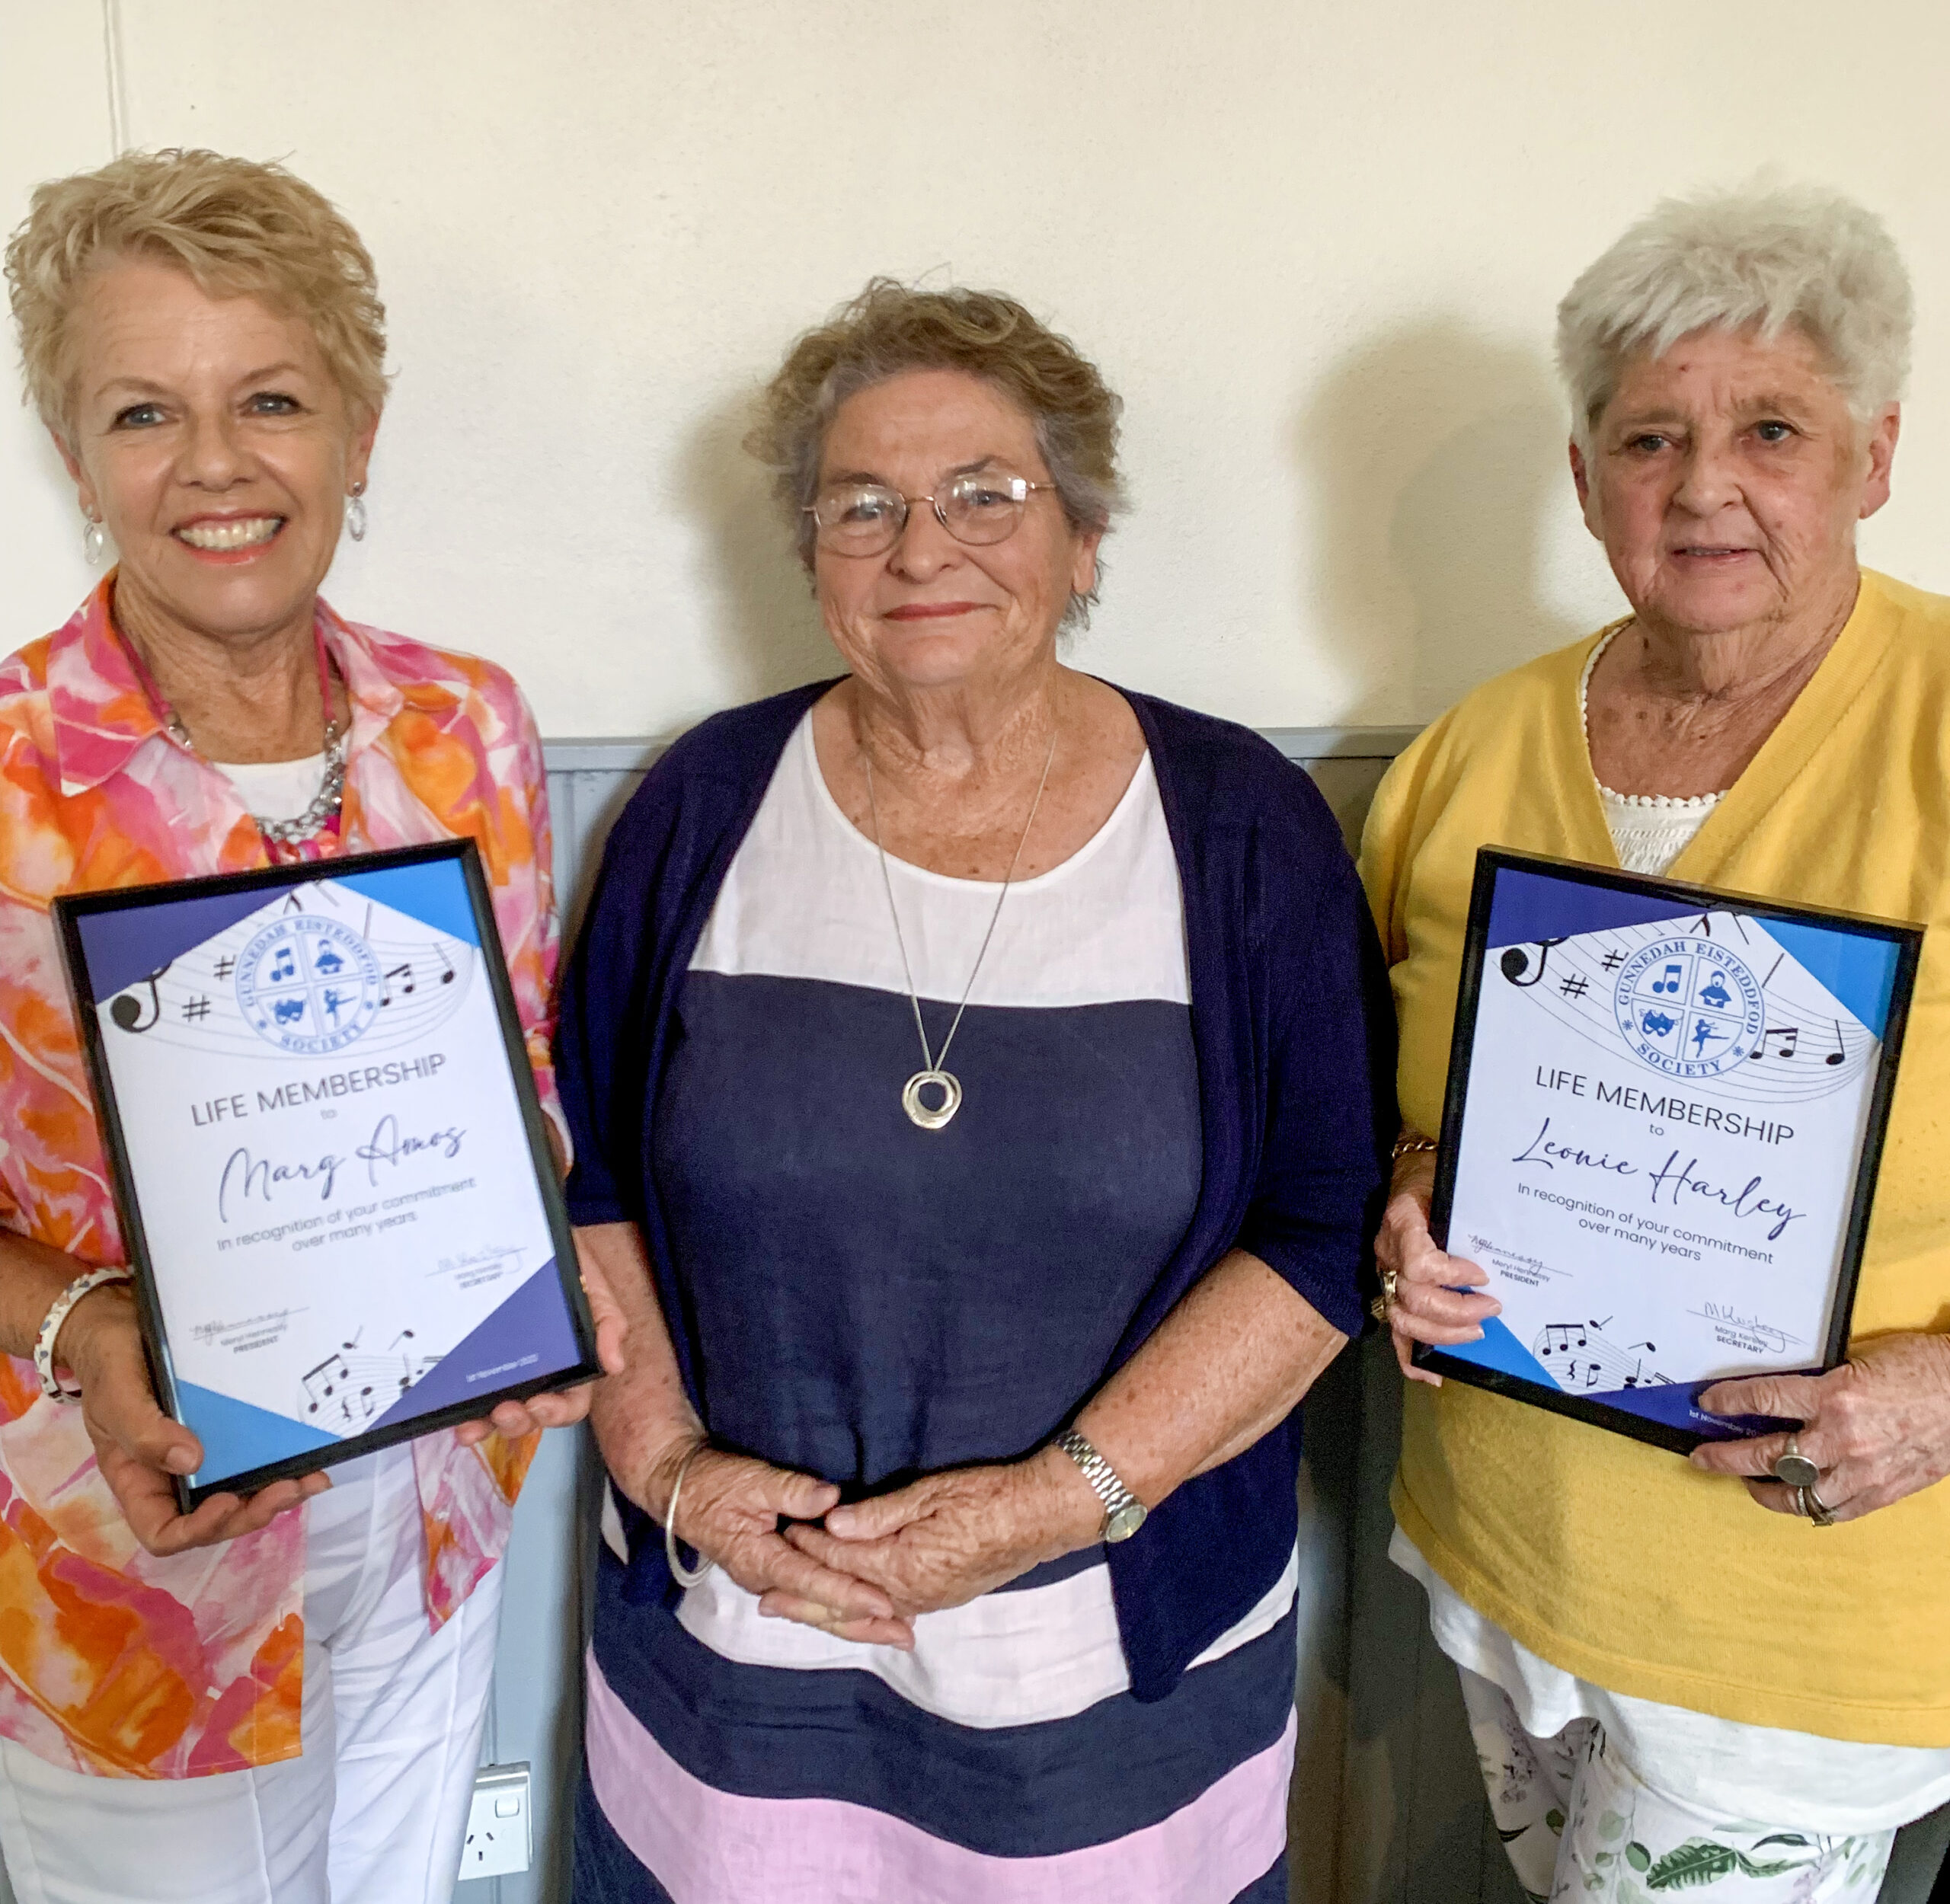 Presentation of Life Membership Certificates for Marg Amos and Leonie Harley.